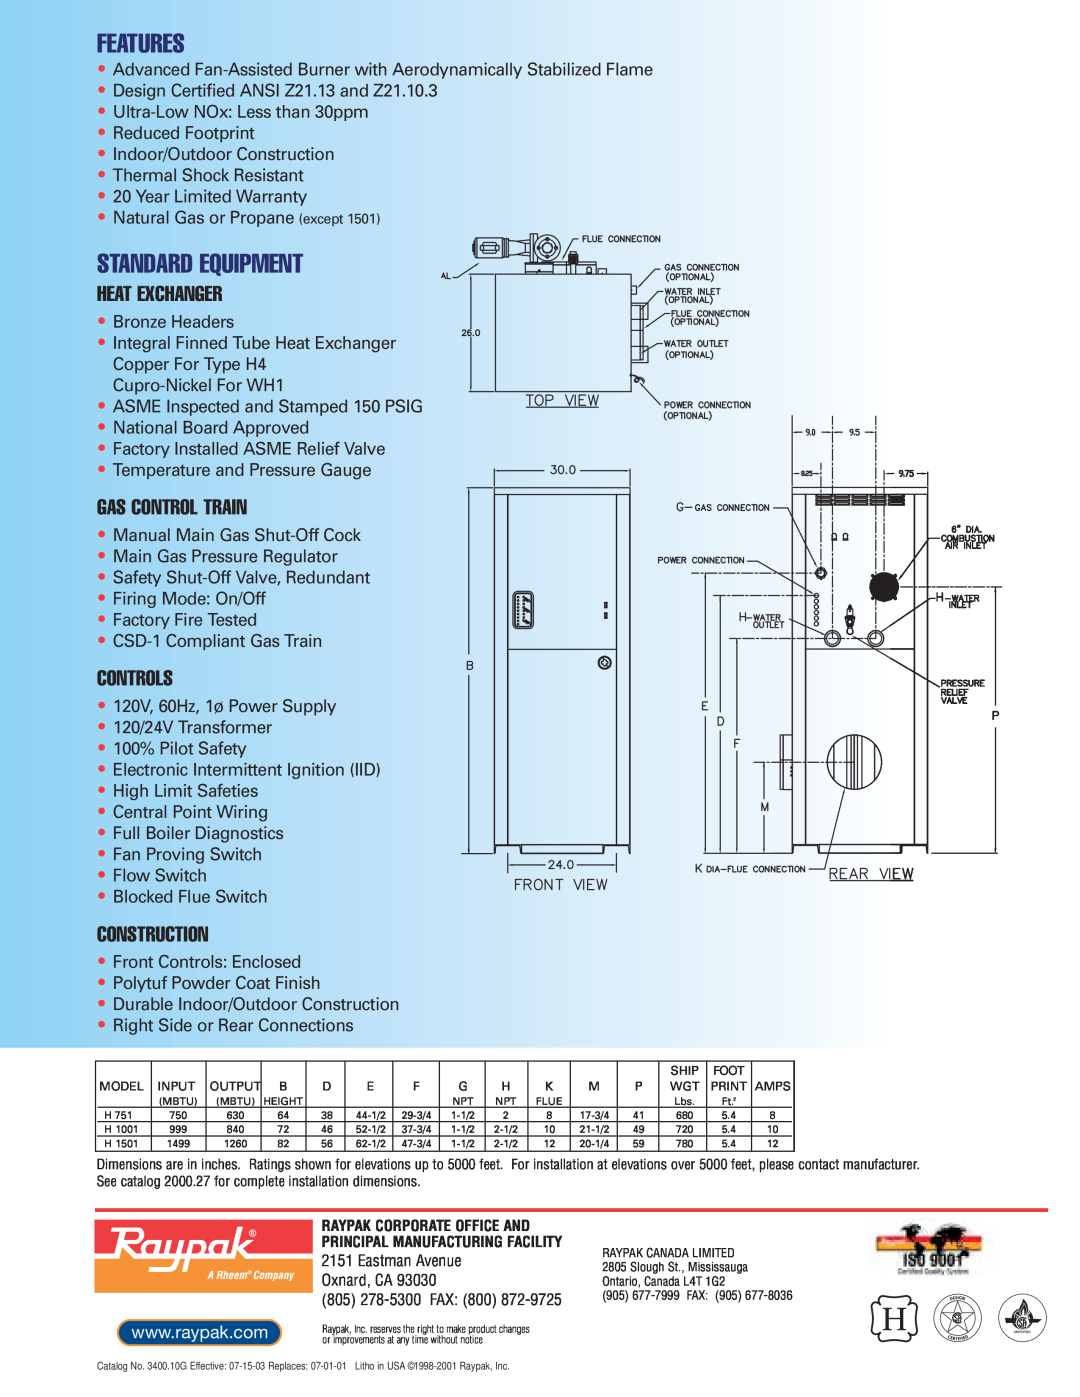 Raypak Commercial Space Heating and Domestic Water manual Features, Standard Equipment, Heat Exchanger, Gas Control Train 